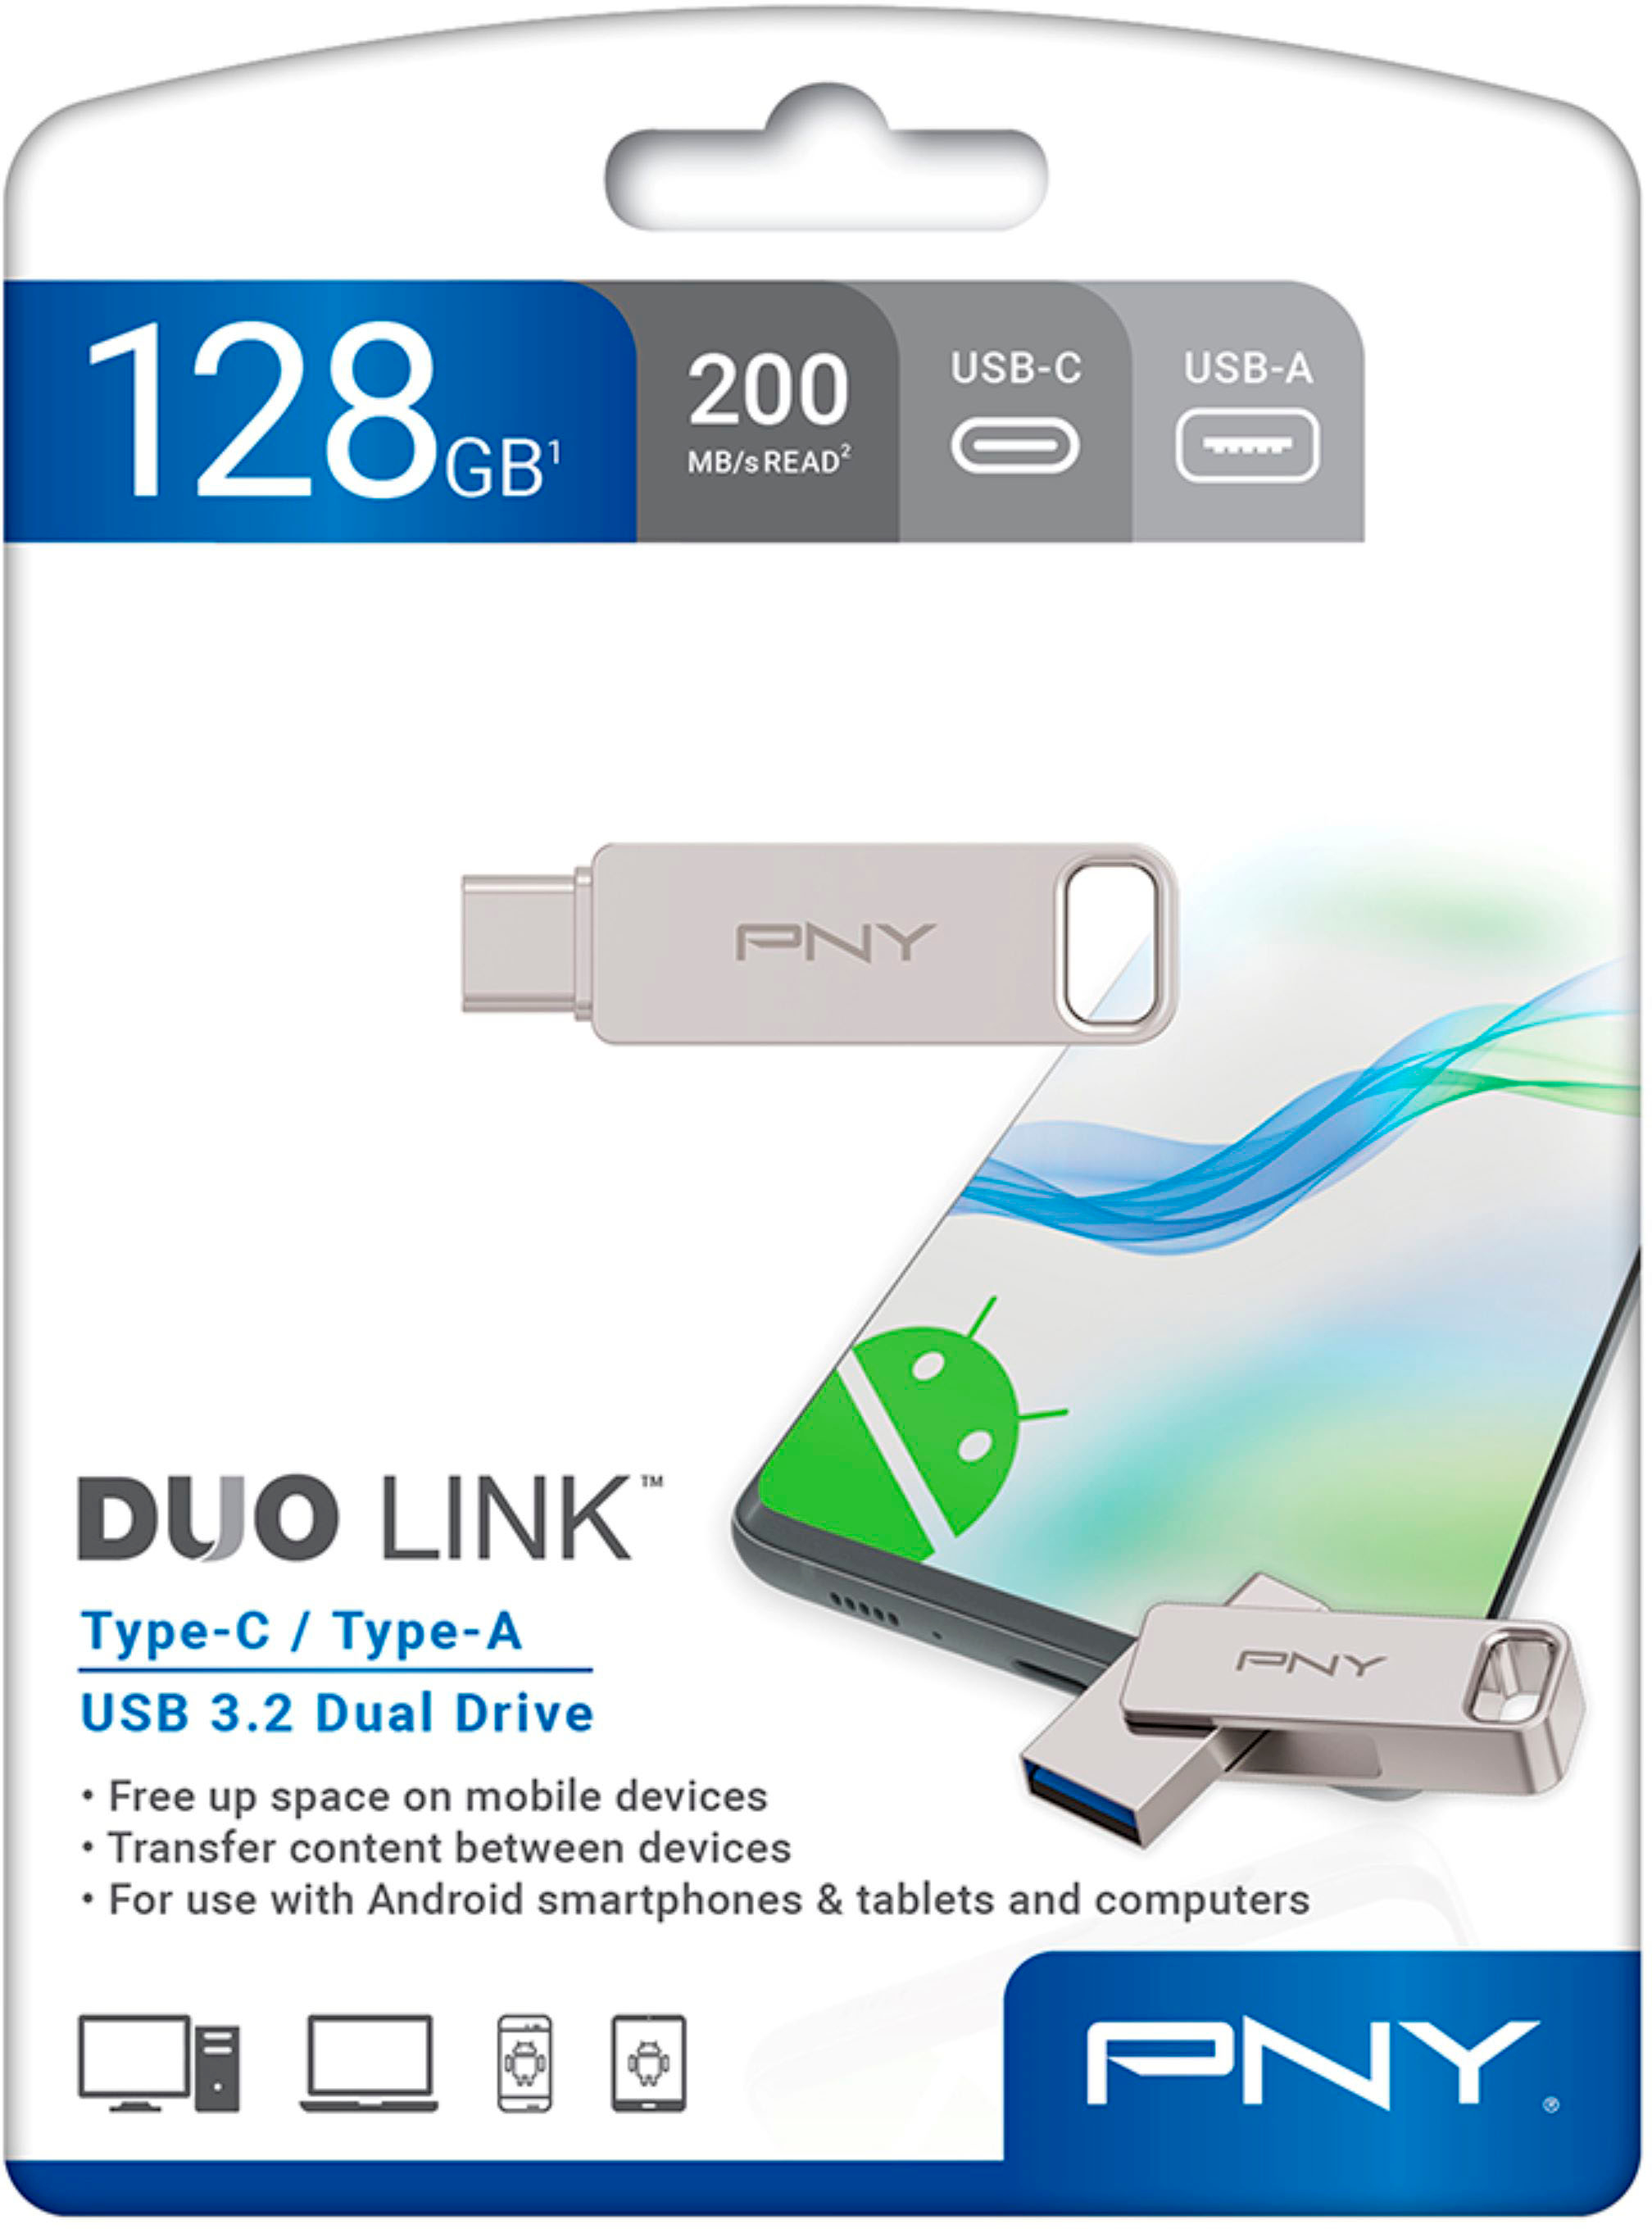 PNY DUO Link 128GB USB 3.0 OTG Flash Drive for iOS Devices and Computers  Gray P-FDI128LA02GC-RB - Best Buy